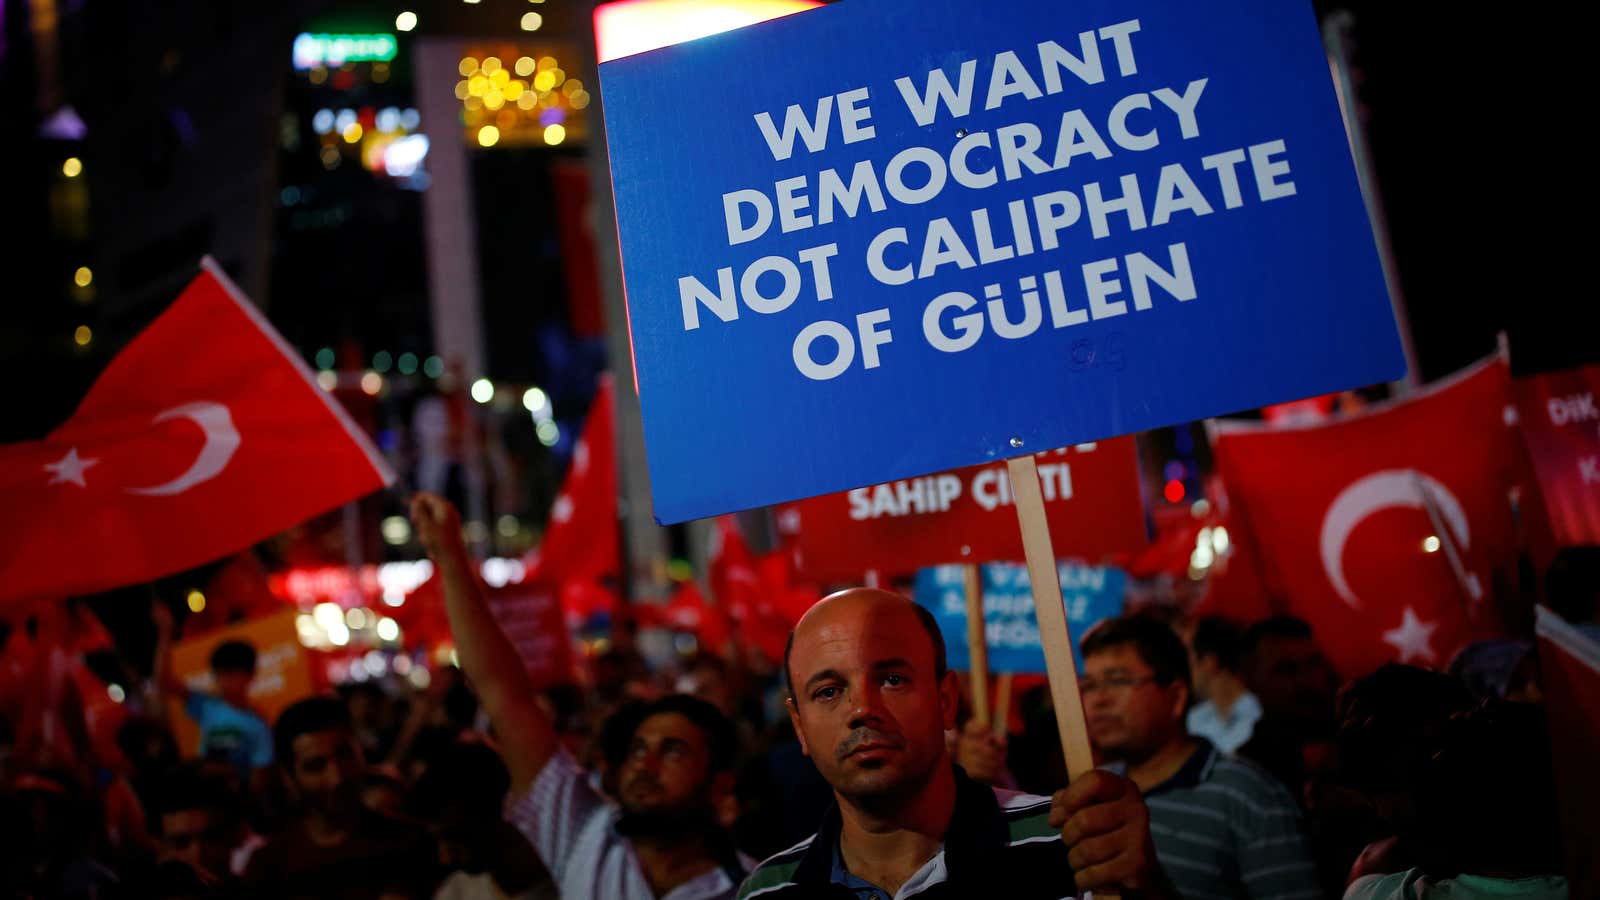 The Gulen movement is accused of being behind the failed Turkish coup.